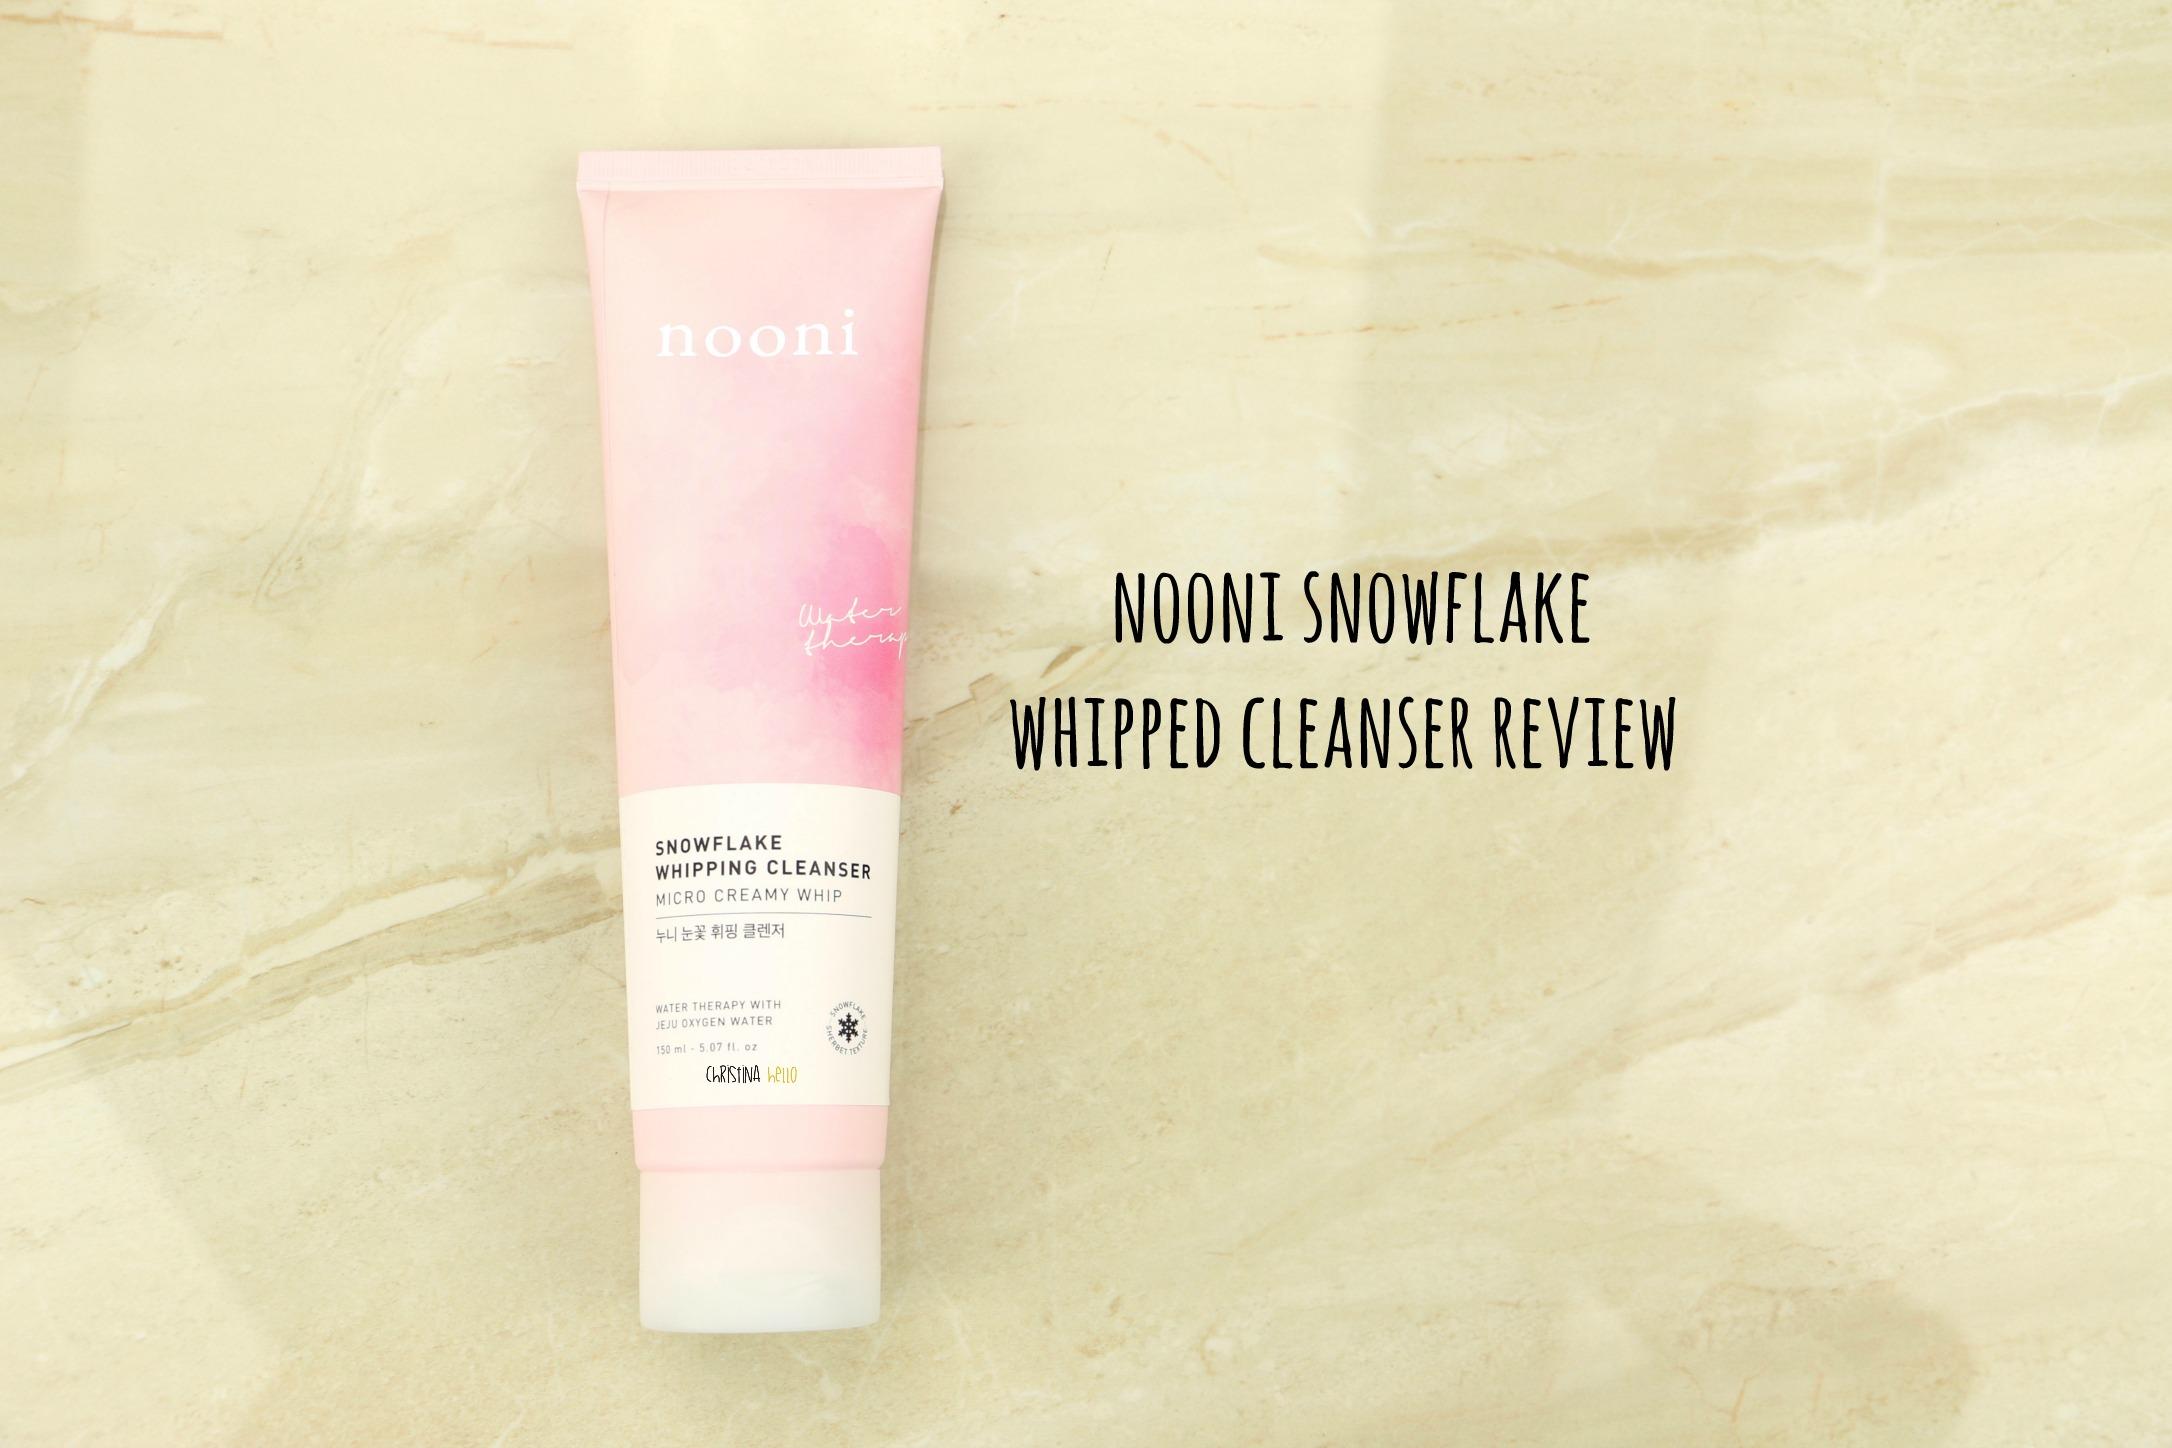 Nooni snowflake whipped cleanser review